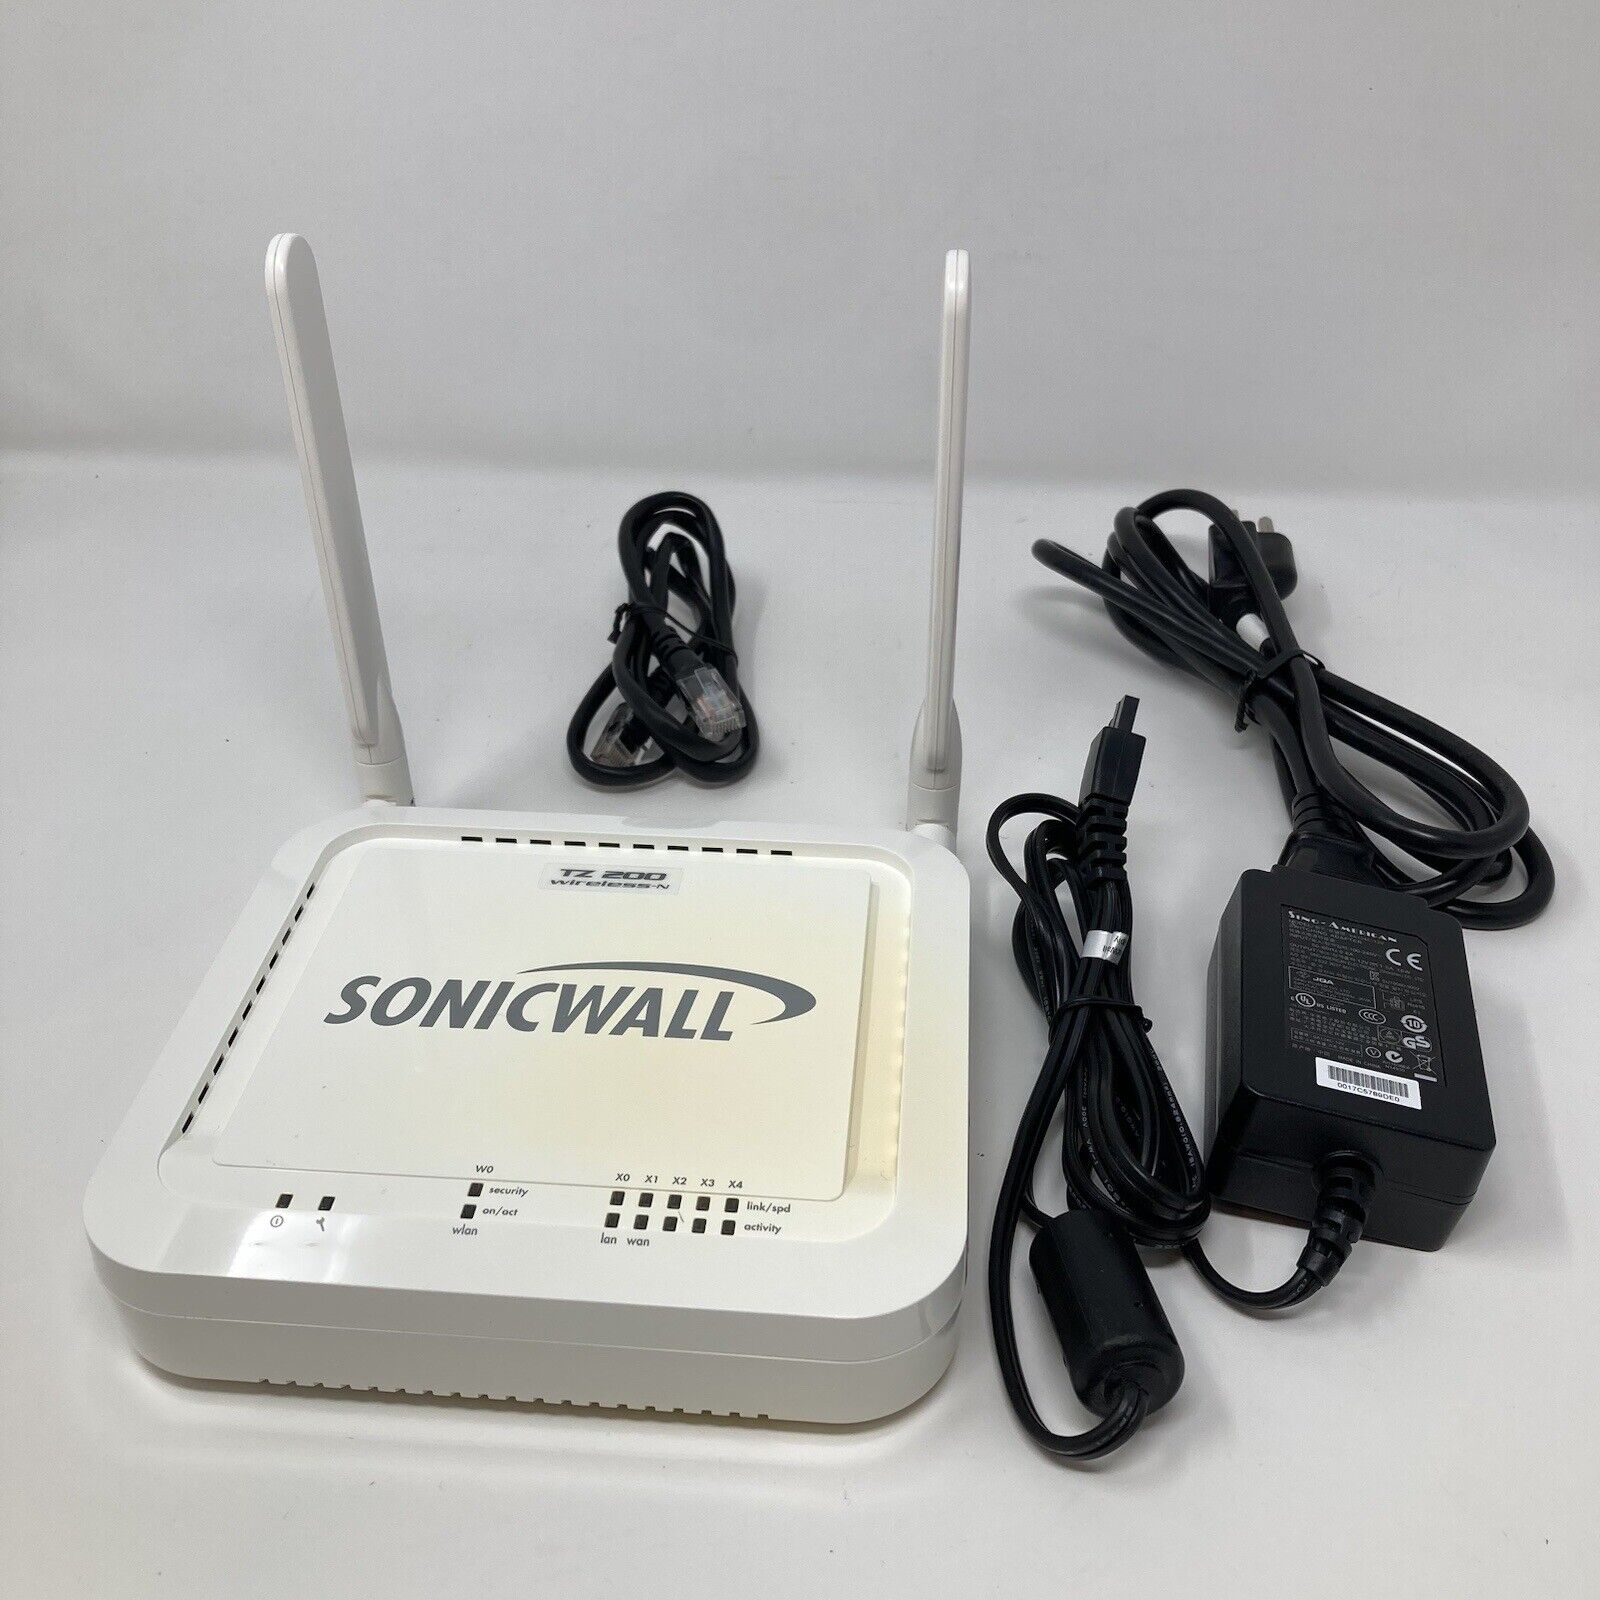 Sonicwall TZ 200 APL22-070 Firewall Wireless Router with Adapter ✅TESTED WORKS